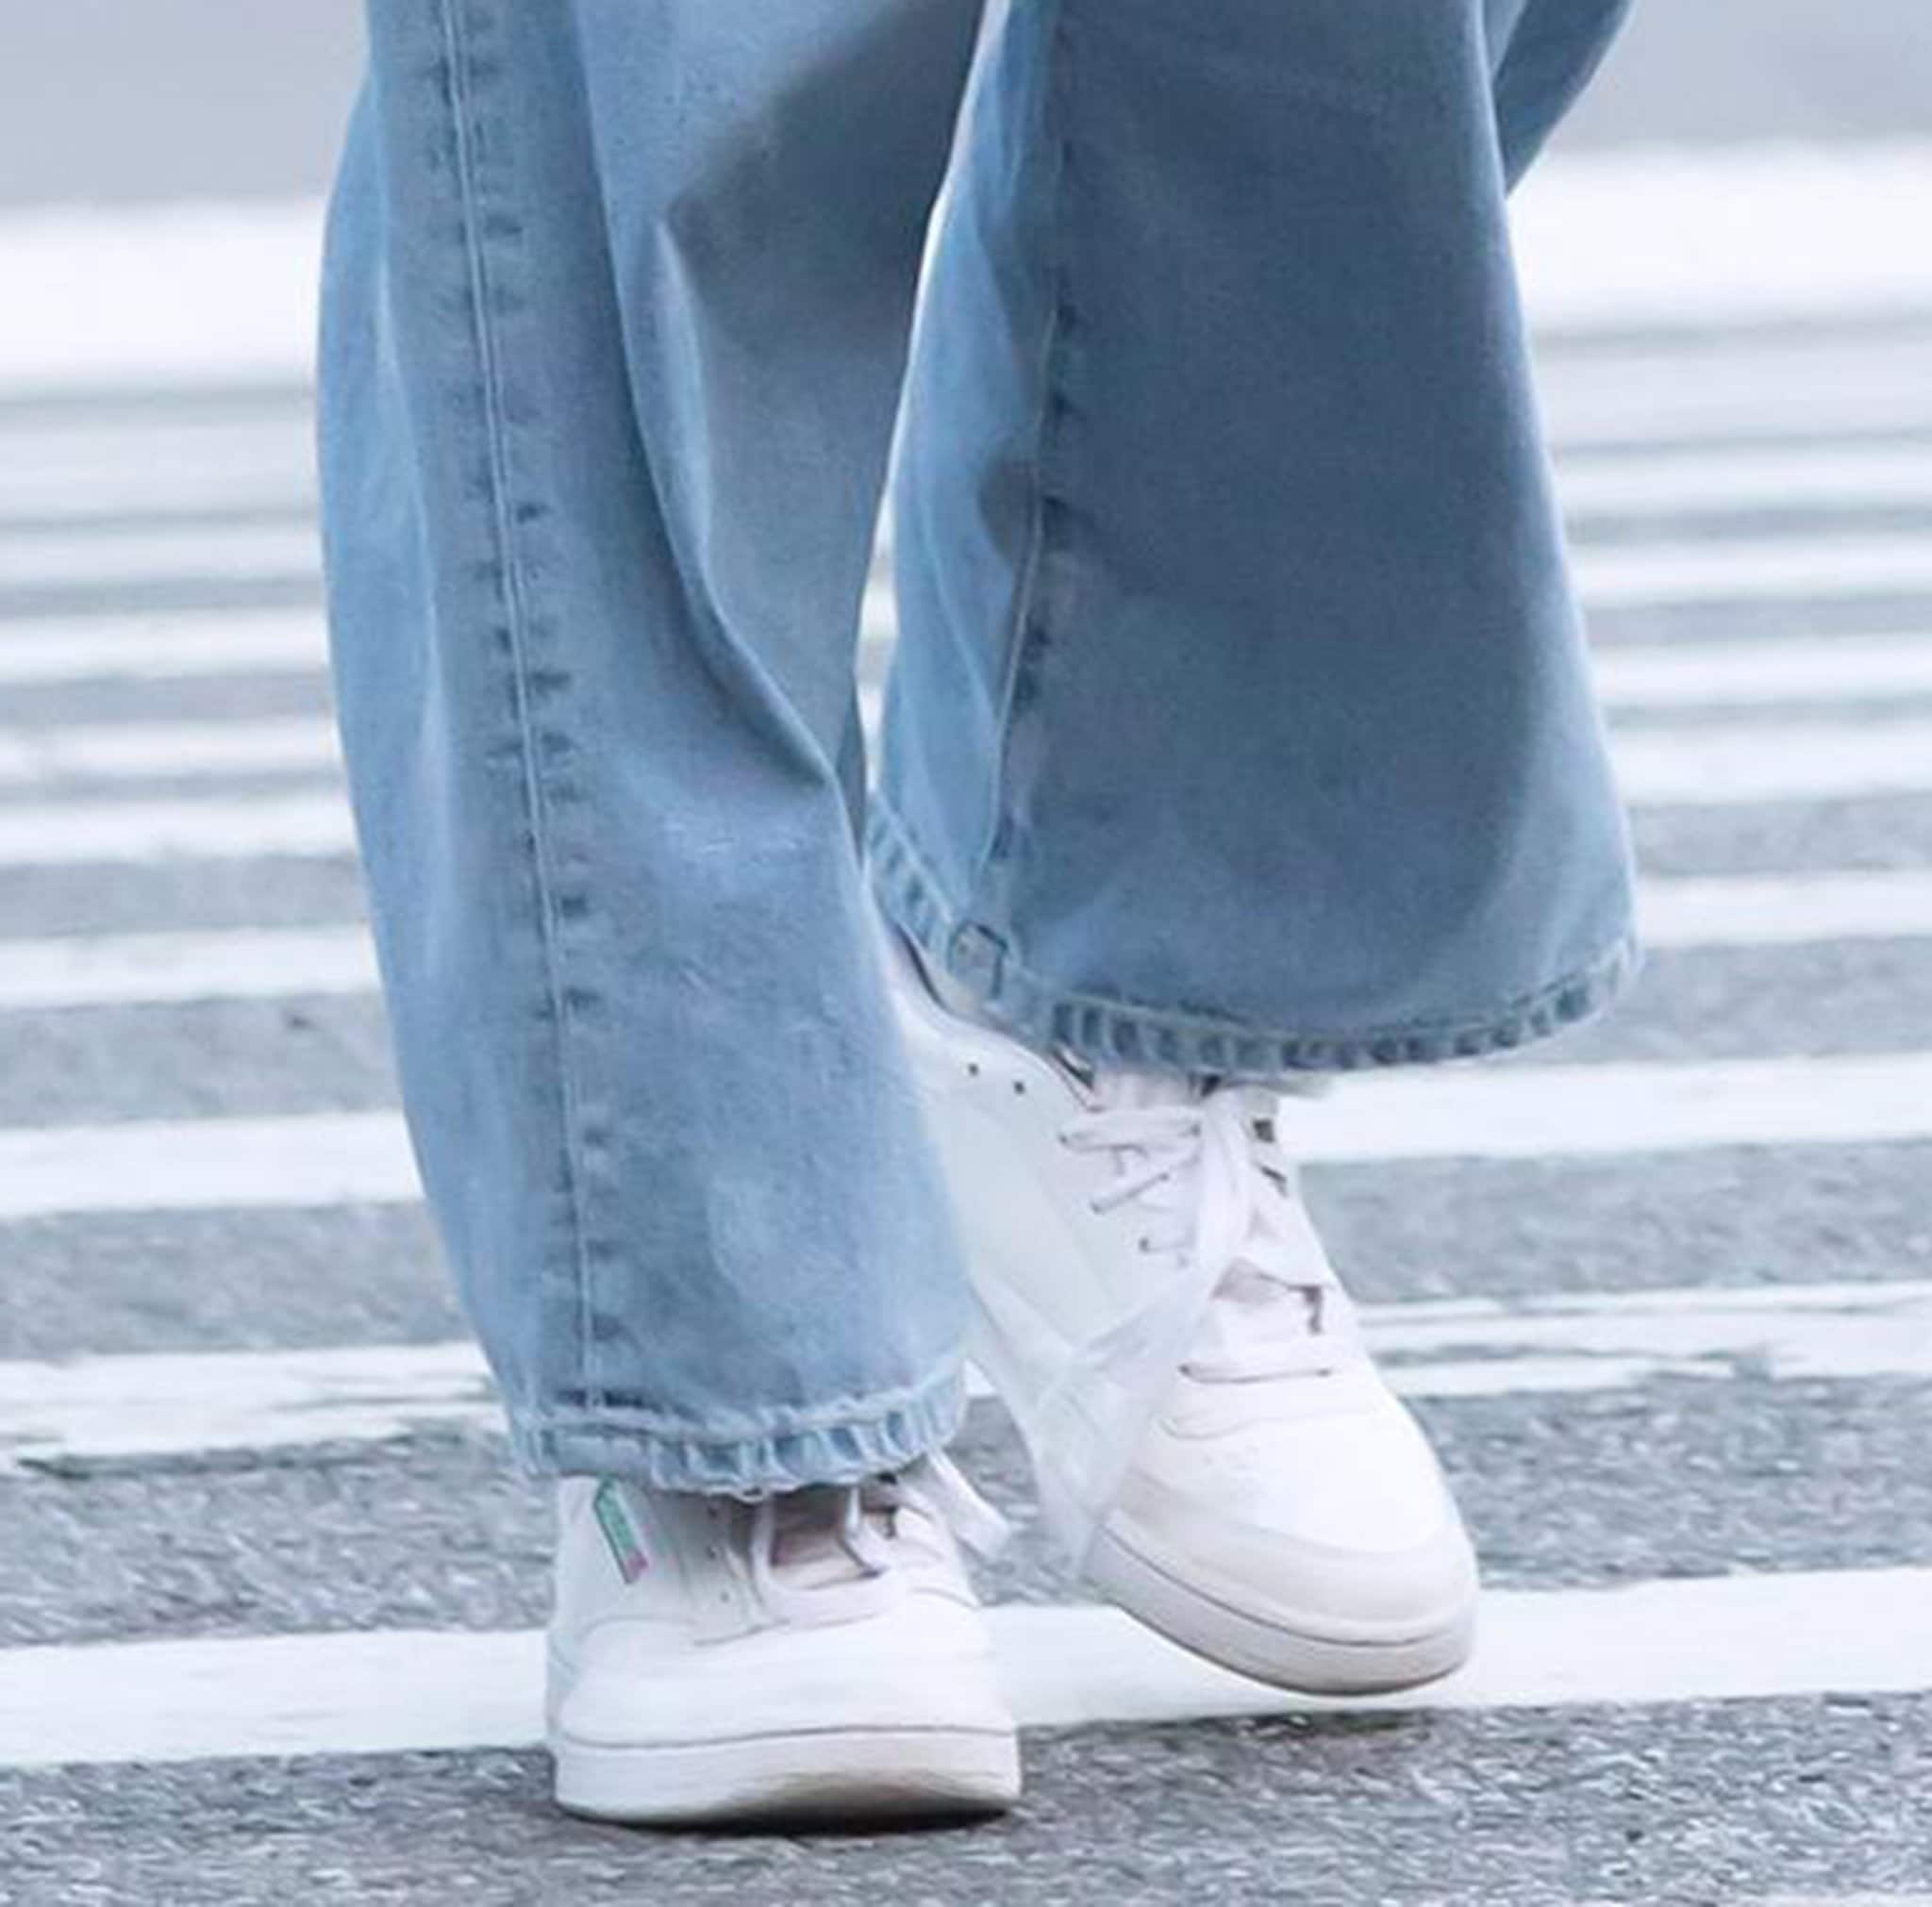 Gigi Hadid completes her throwback casual outfit with Reebok Club C 85 sneakers